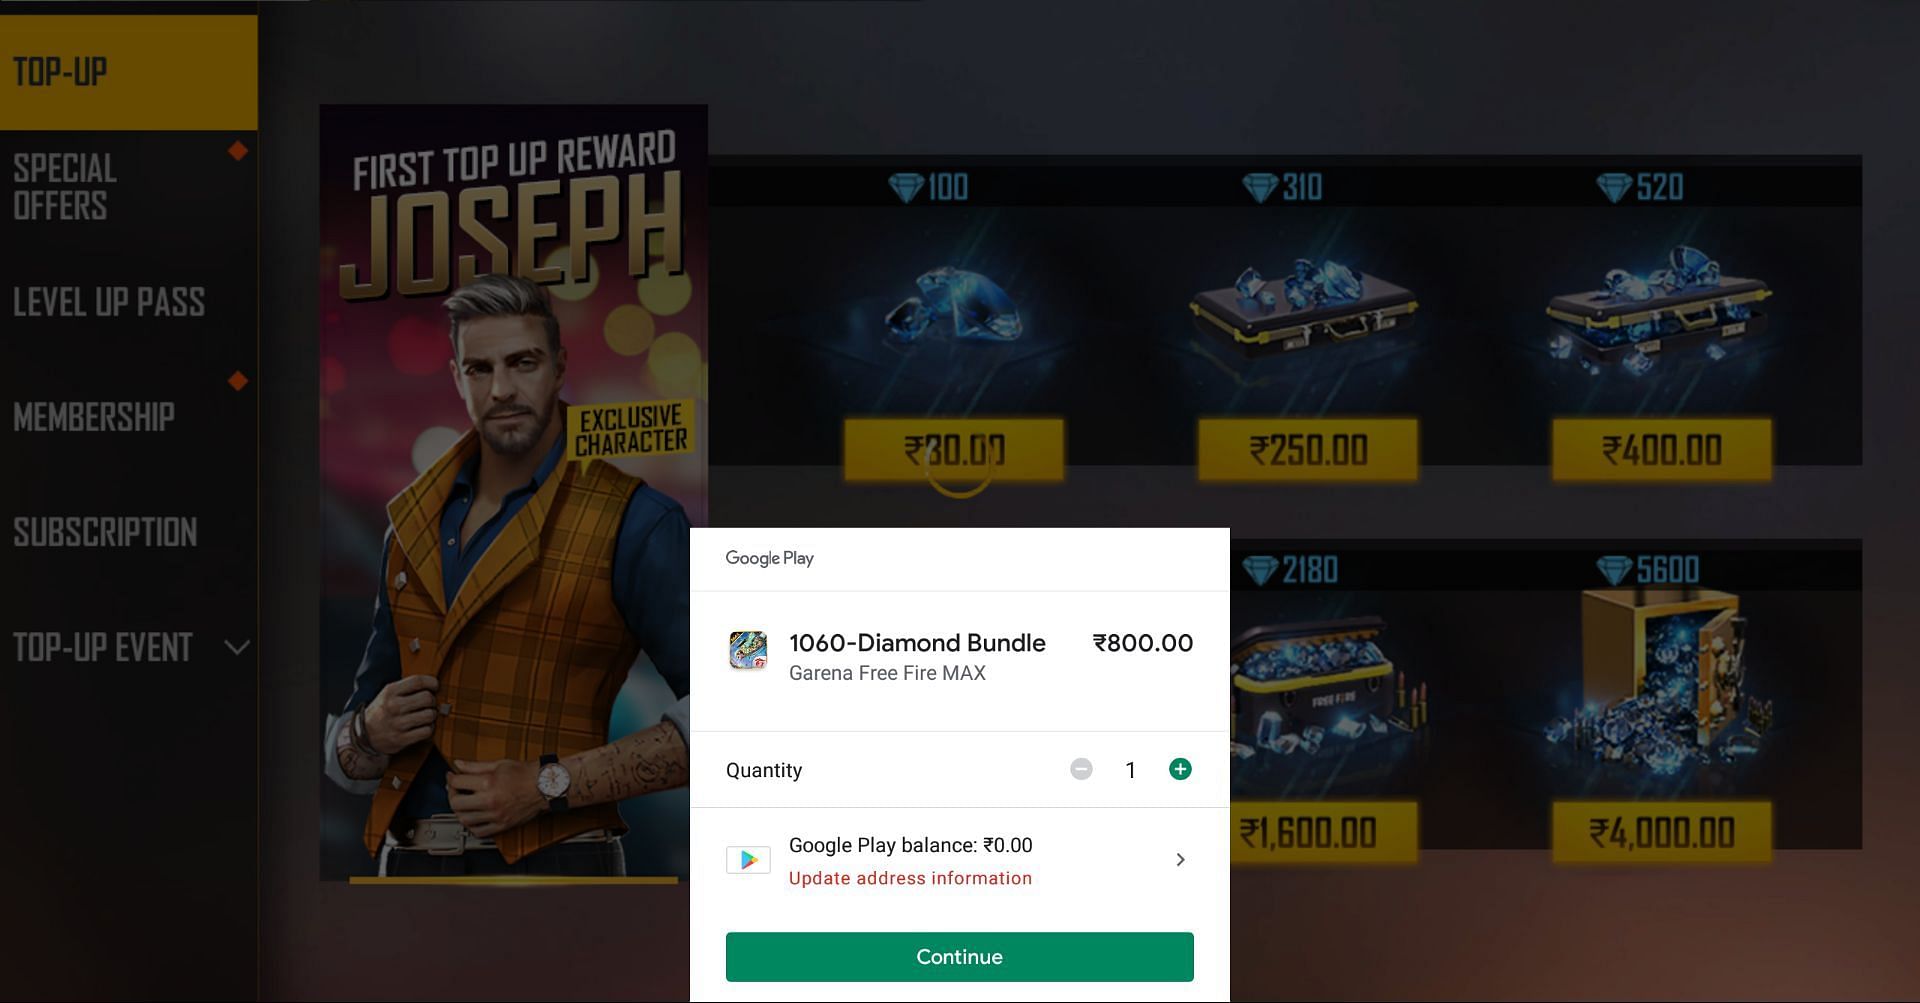 In-app purchases are working fine in the better version (Image via Garena)